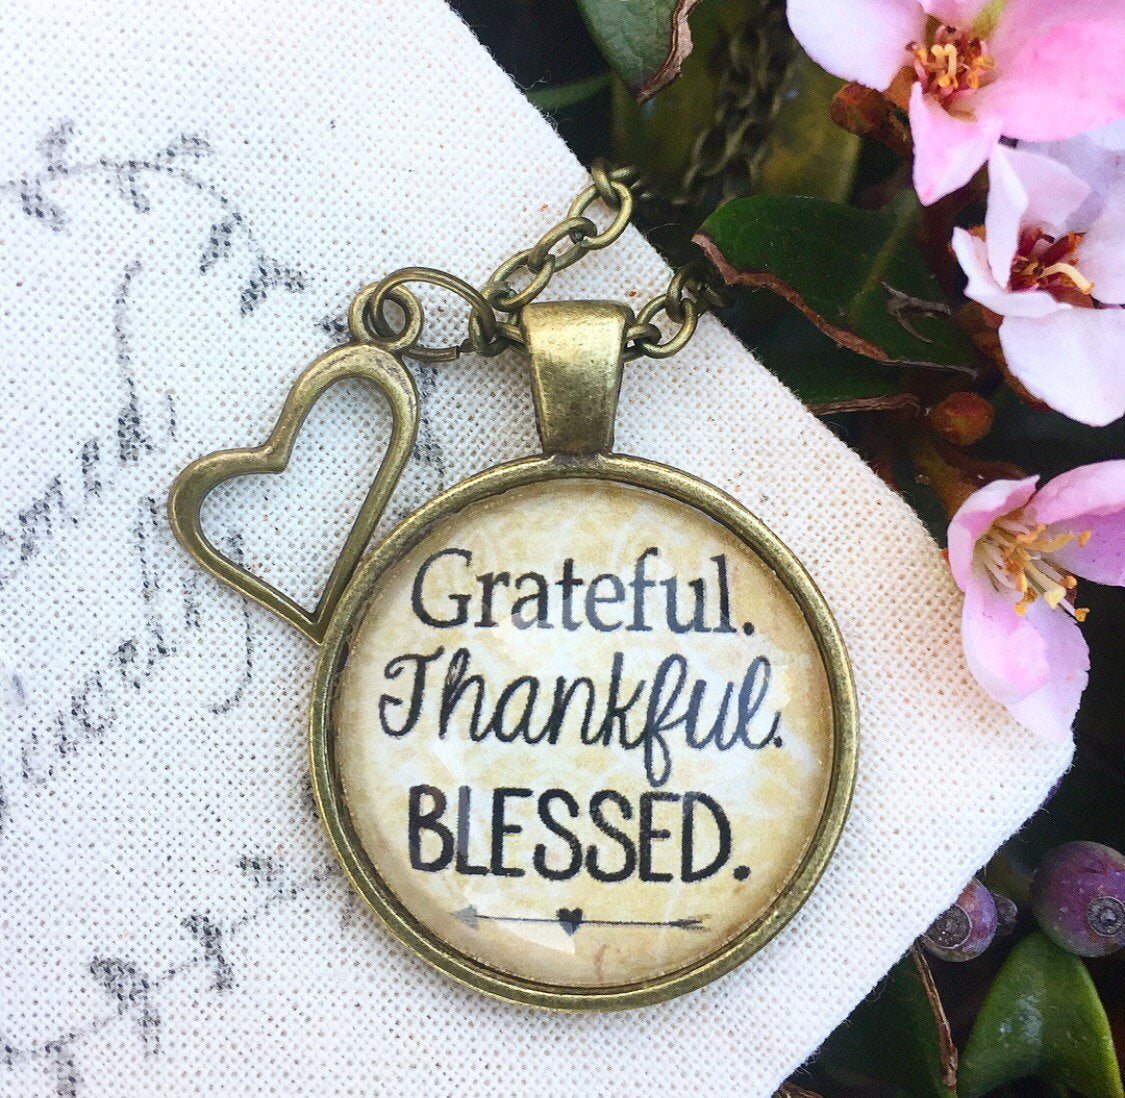 Grateful. Thankful. Blessed Pendant Necklace - Redeemed Jewelry